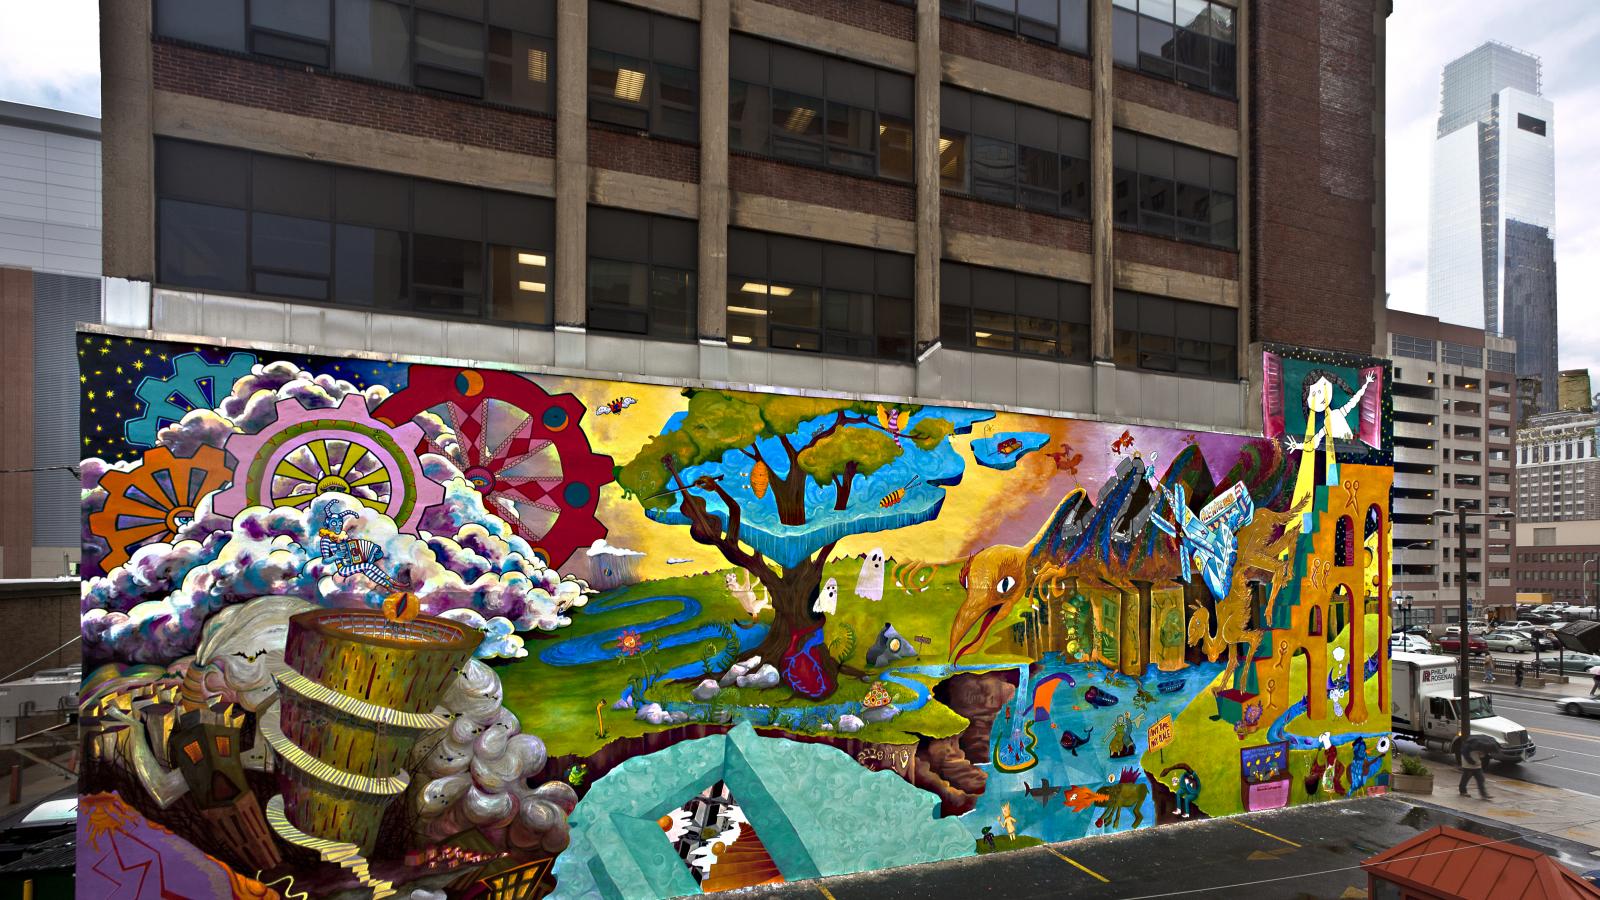 A colorful mural on a building wall in Philadelphia